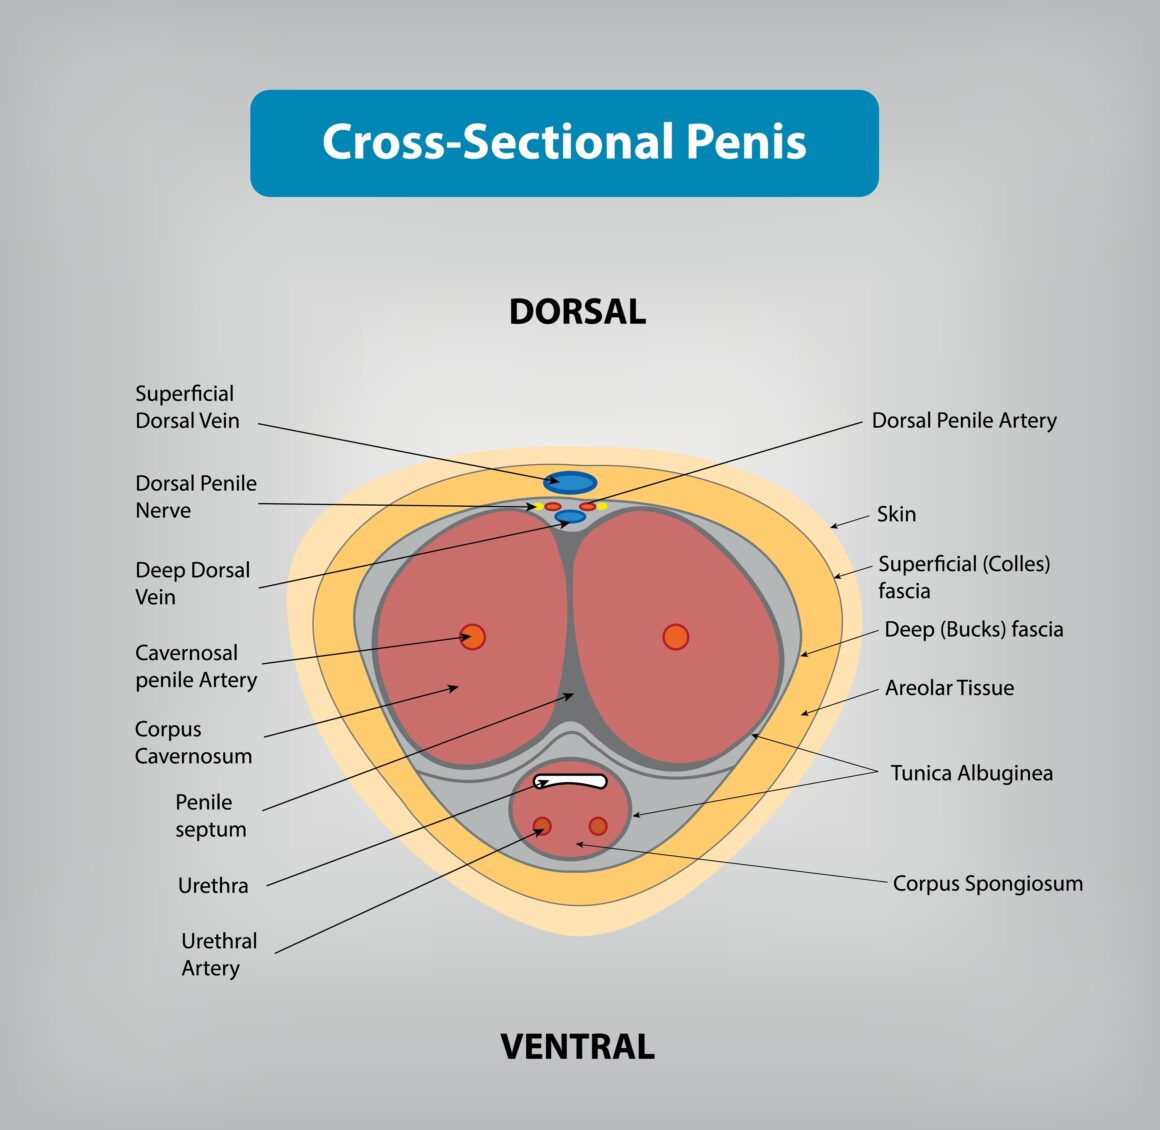 Cross-section diagram of a penis